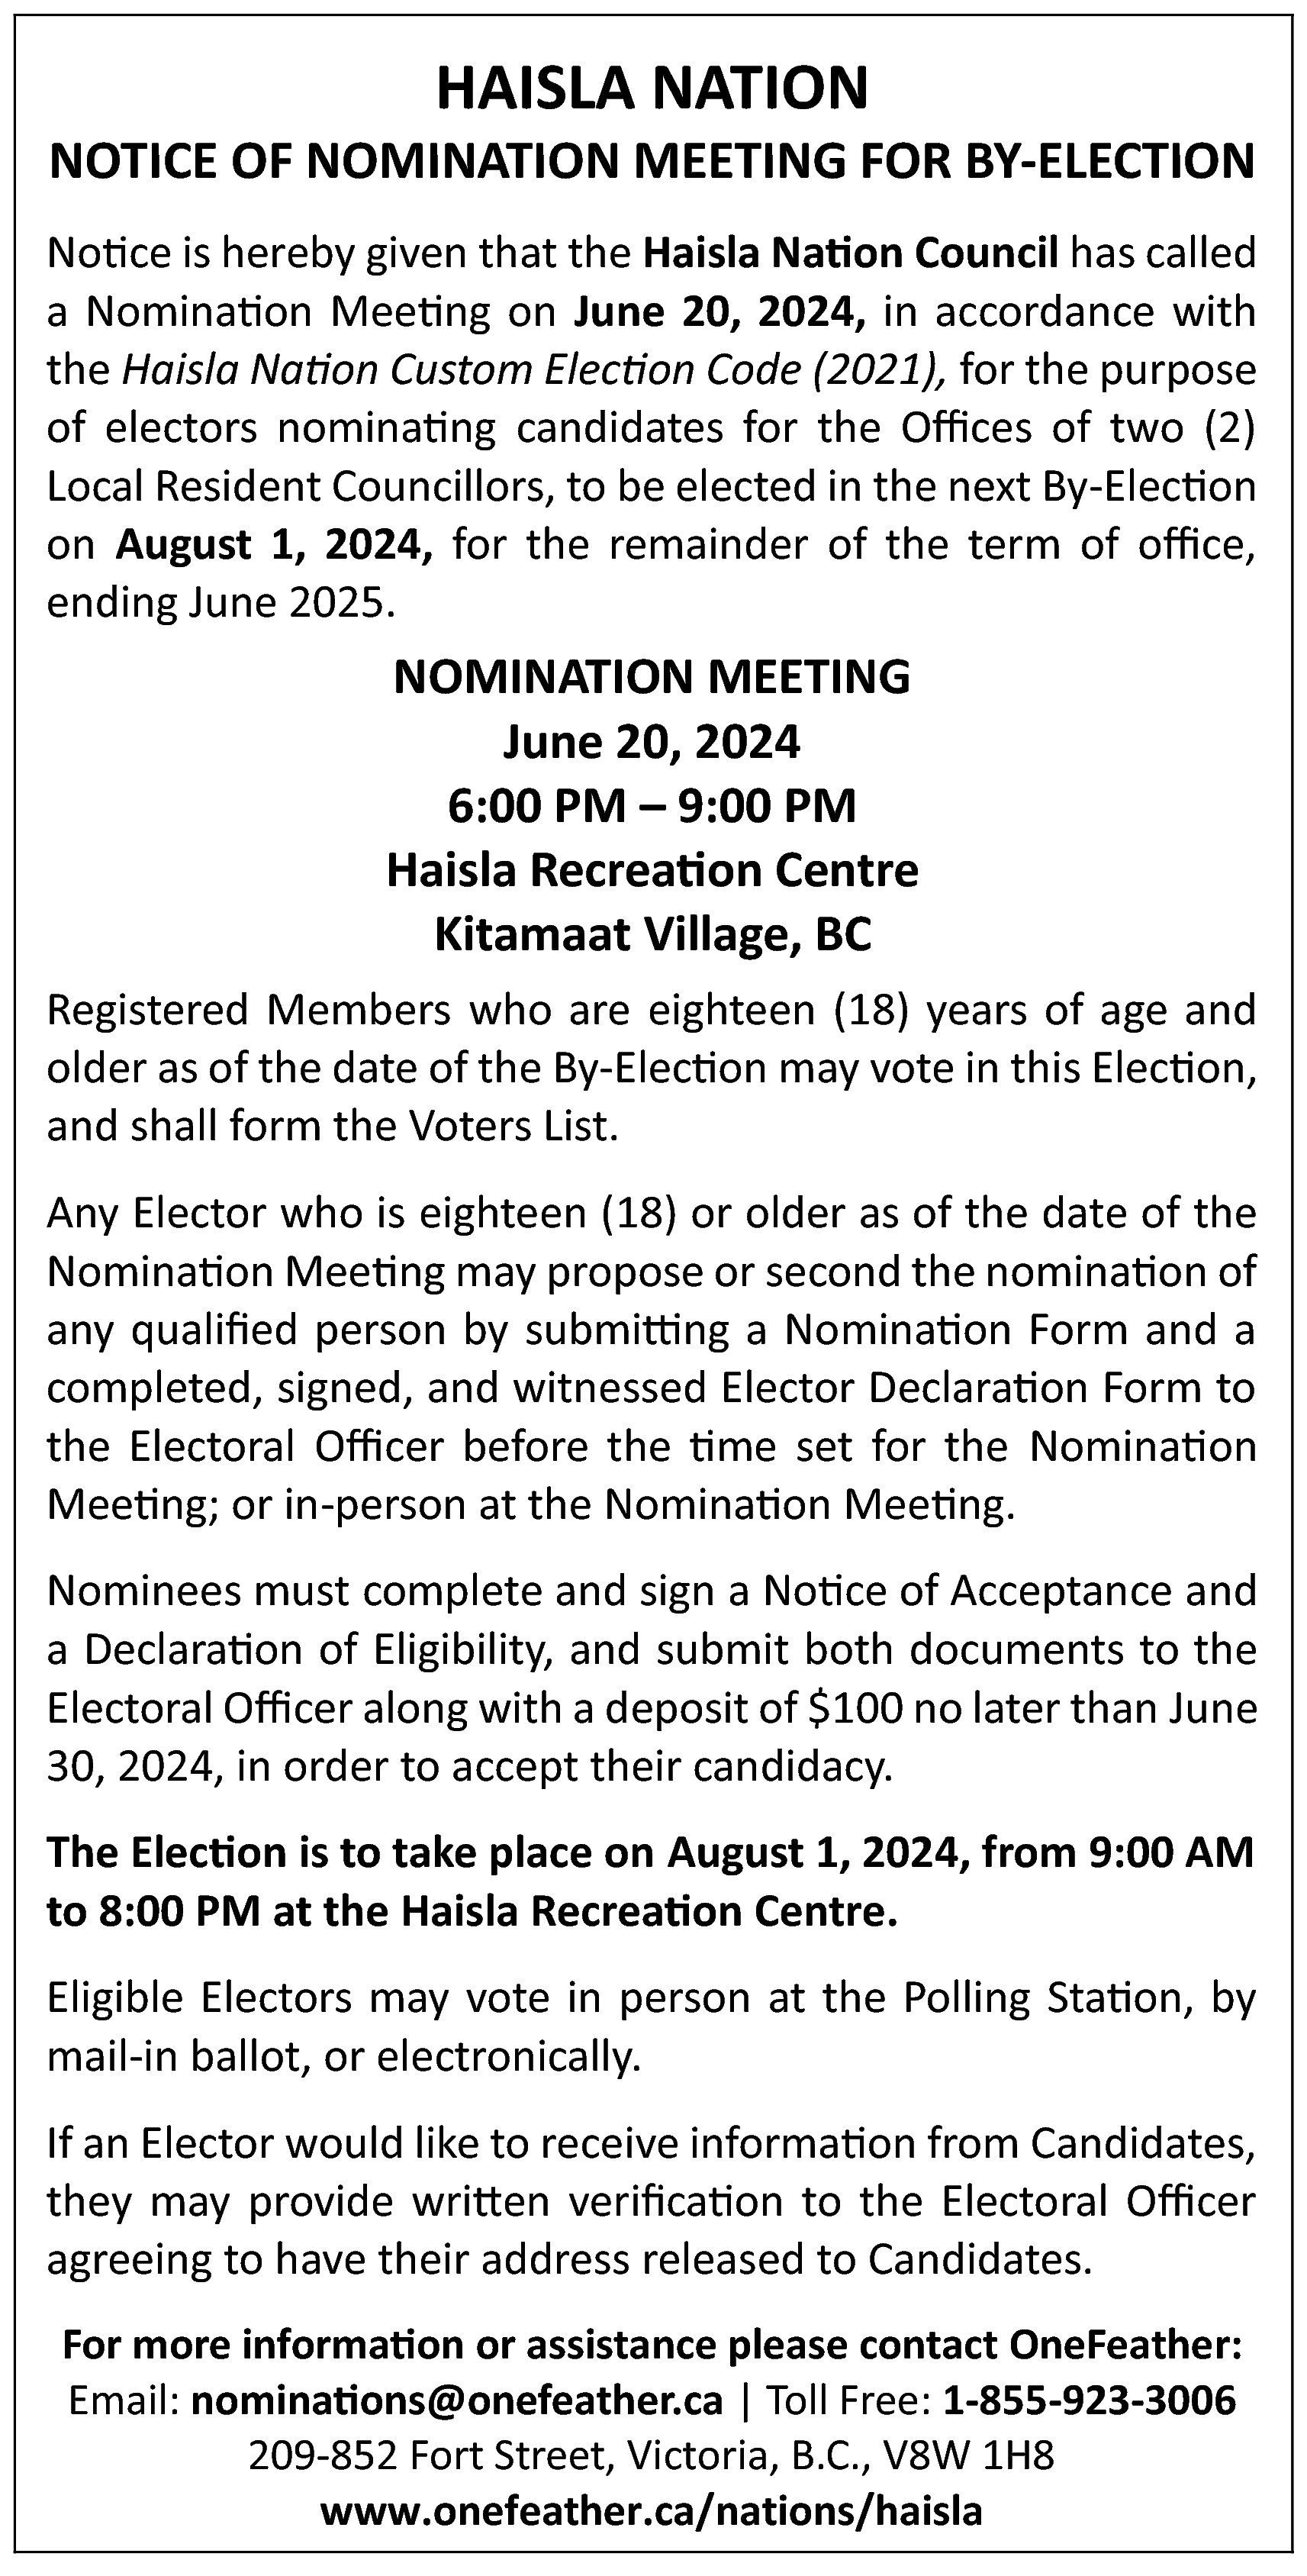 HAISLA NATION <br> <br>NOTICE OF  HAISLA NATION    NOTICE OF NOMINATION MEETING FOR BY-ELECTION  Notice is hereby given that the Haisla Nation Council has called  a Nomination Meeting on June 20, 2024, in accordance with  the Haisla Nation Custom Election Code (2021), for the purpose  of electors nominating candidates for the Offices of two (2)  Local Resident Councillors, to be elected in the next By-Election  on August 1, 2024, for the remainder of the term of office,  ending June 2025.    NOMINATION MEETING  June 20, 2024  6:00 PM – 9:00 PM  Haisla Recreation Centre  Kitamaat Village, BC  Registered Members who are eighteen (18) years of age and  older as of the date of the By-Election may vote in this Election,  and shall form the Voters List.  Any Elector who is eighteen (18) or older as of the date of the  Nomination Meeting may propose or second the nomination of  any qualified person by submitting a Nomination Form and a  completed, signed, and witnessed Elector Declaration Form to  the Electoral Officer before the time set for the Nomination  Meeting; or in-person at the Nomination Meeting.  Nominees must complete and sign a Notice of Acceptance and  a Declaration of Eligibility, and submit both documents to the  Electoral Officer along with a deposit of $100 no later than June  30, 2024, in order to accept their candidacy.  The Election is to take place on August 1, 2024, from 9:00 AM  to 8:00 PM at the Haisla Recreation Centre.  Eligible Electors may vote in person at the Polling Station, by  mail-in ballot, or electronically.  If an Elector would like to receive information from Candidates,  they may provide written verification to the Electoral Officer  agreeing to have their address released to Candidates.  For more information or assistance please contact OneFeather:  Email: nominations@onefeather.ca | Toll Free: 1-855-923-3006  209-852 Fort Street, Victoria, B.C., V8W 1H8  www.onefeather.ca/nations/haisla    